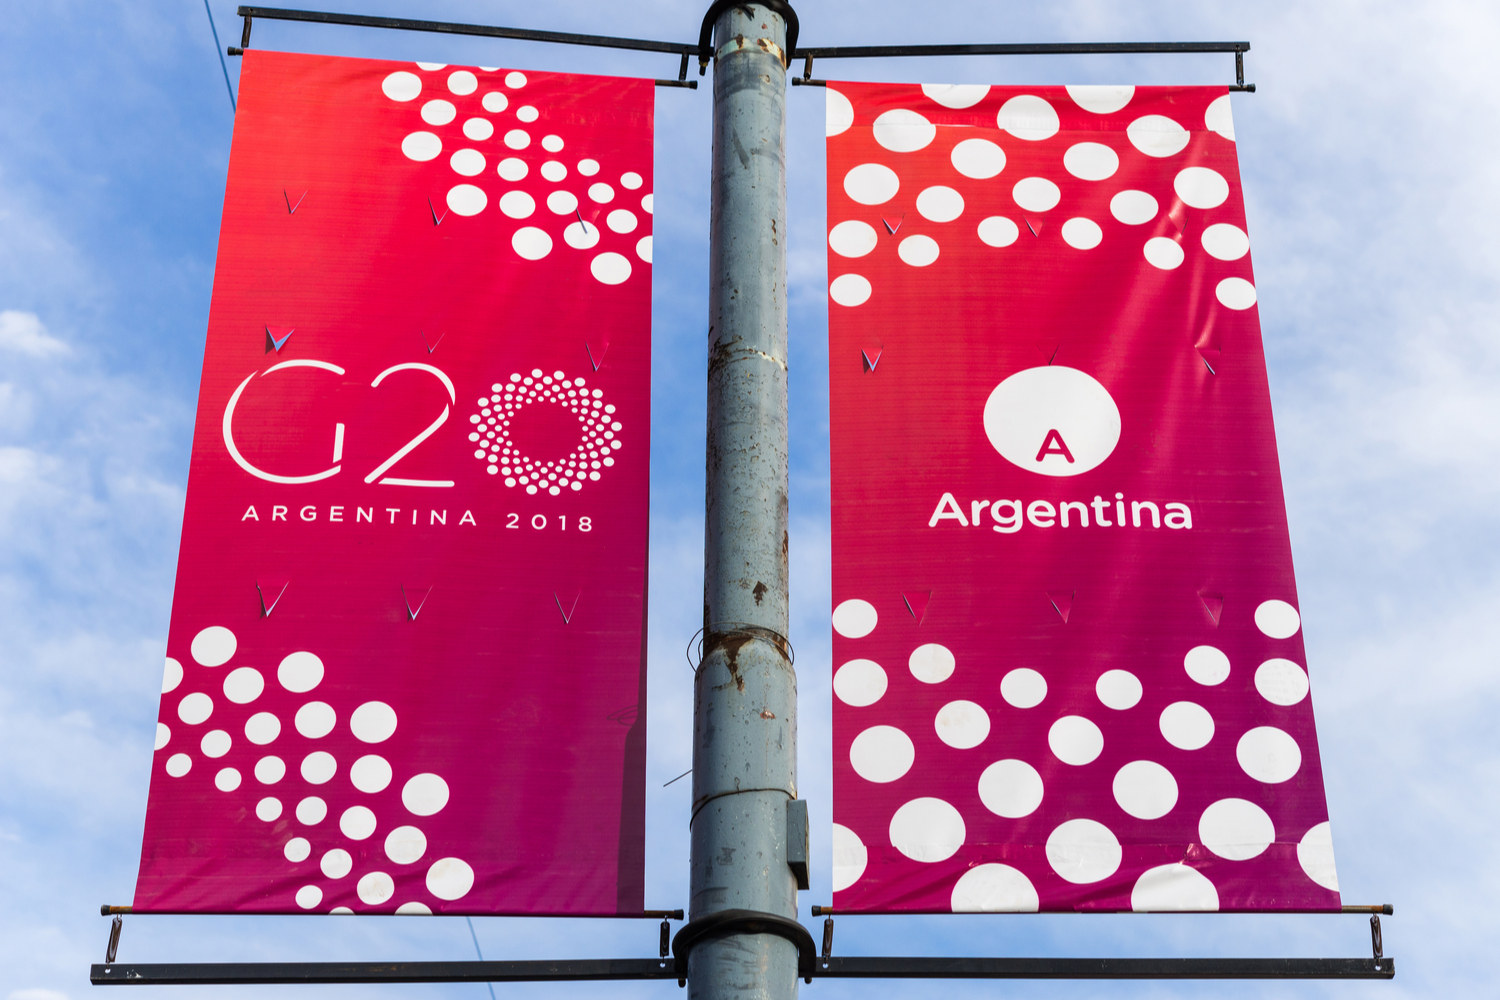 G20 Leaders Pledge Crypto-Asset Regulation After Buenos Aires Meeting